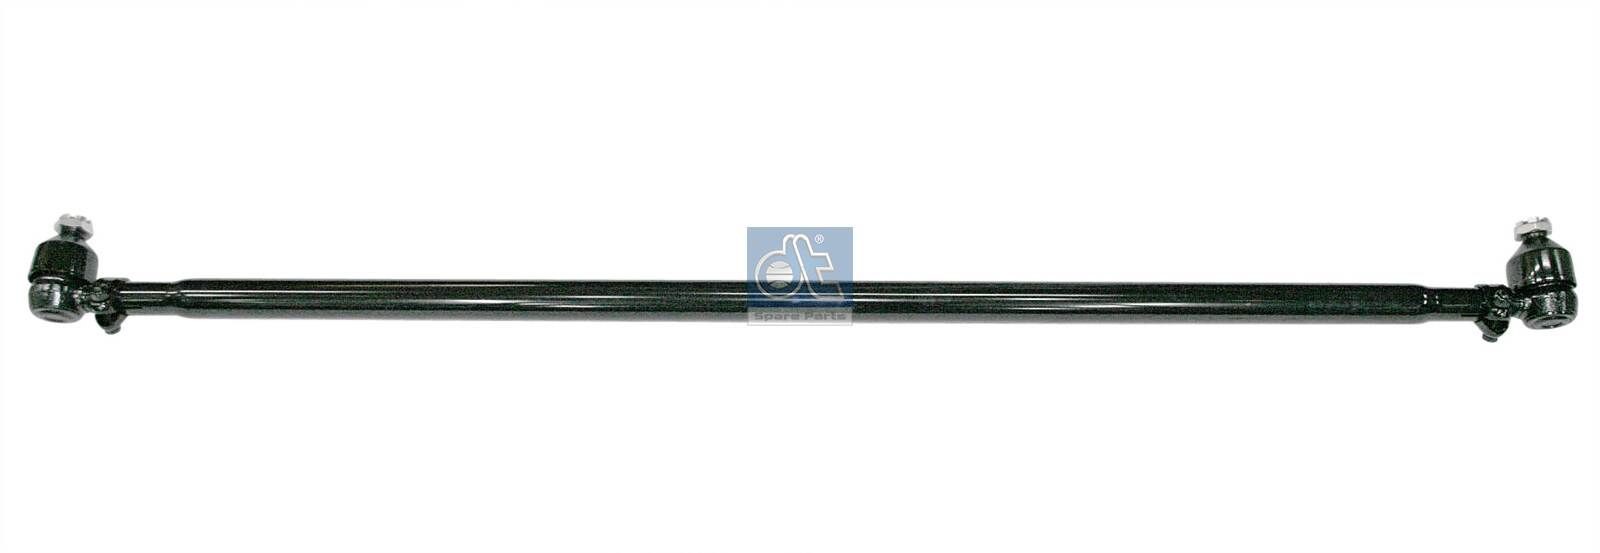 DT Spare Parts 4.63733 Rod Assembly 9413300103